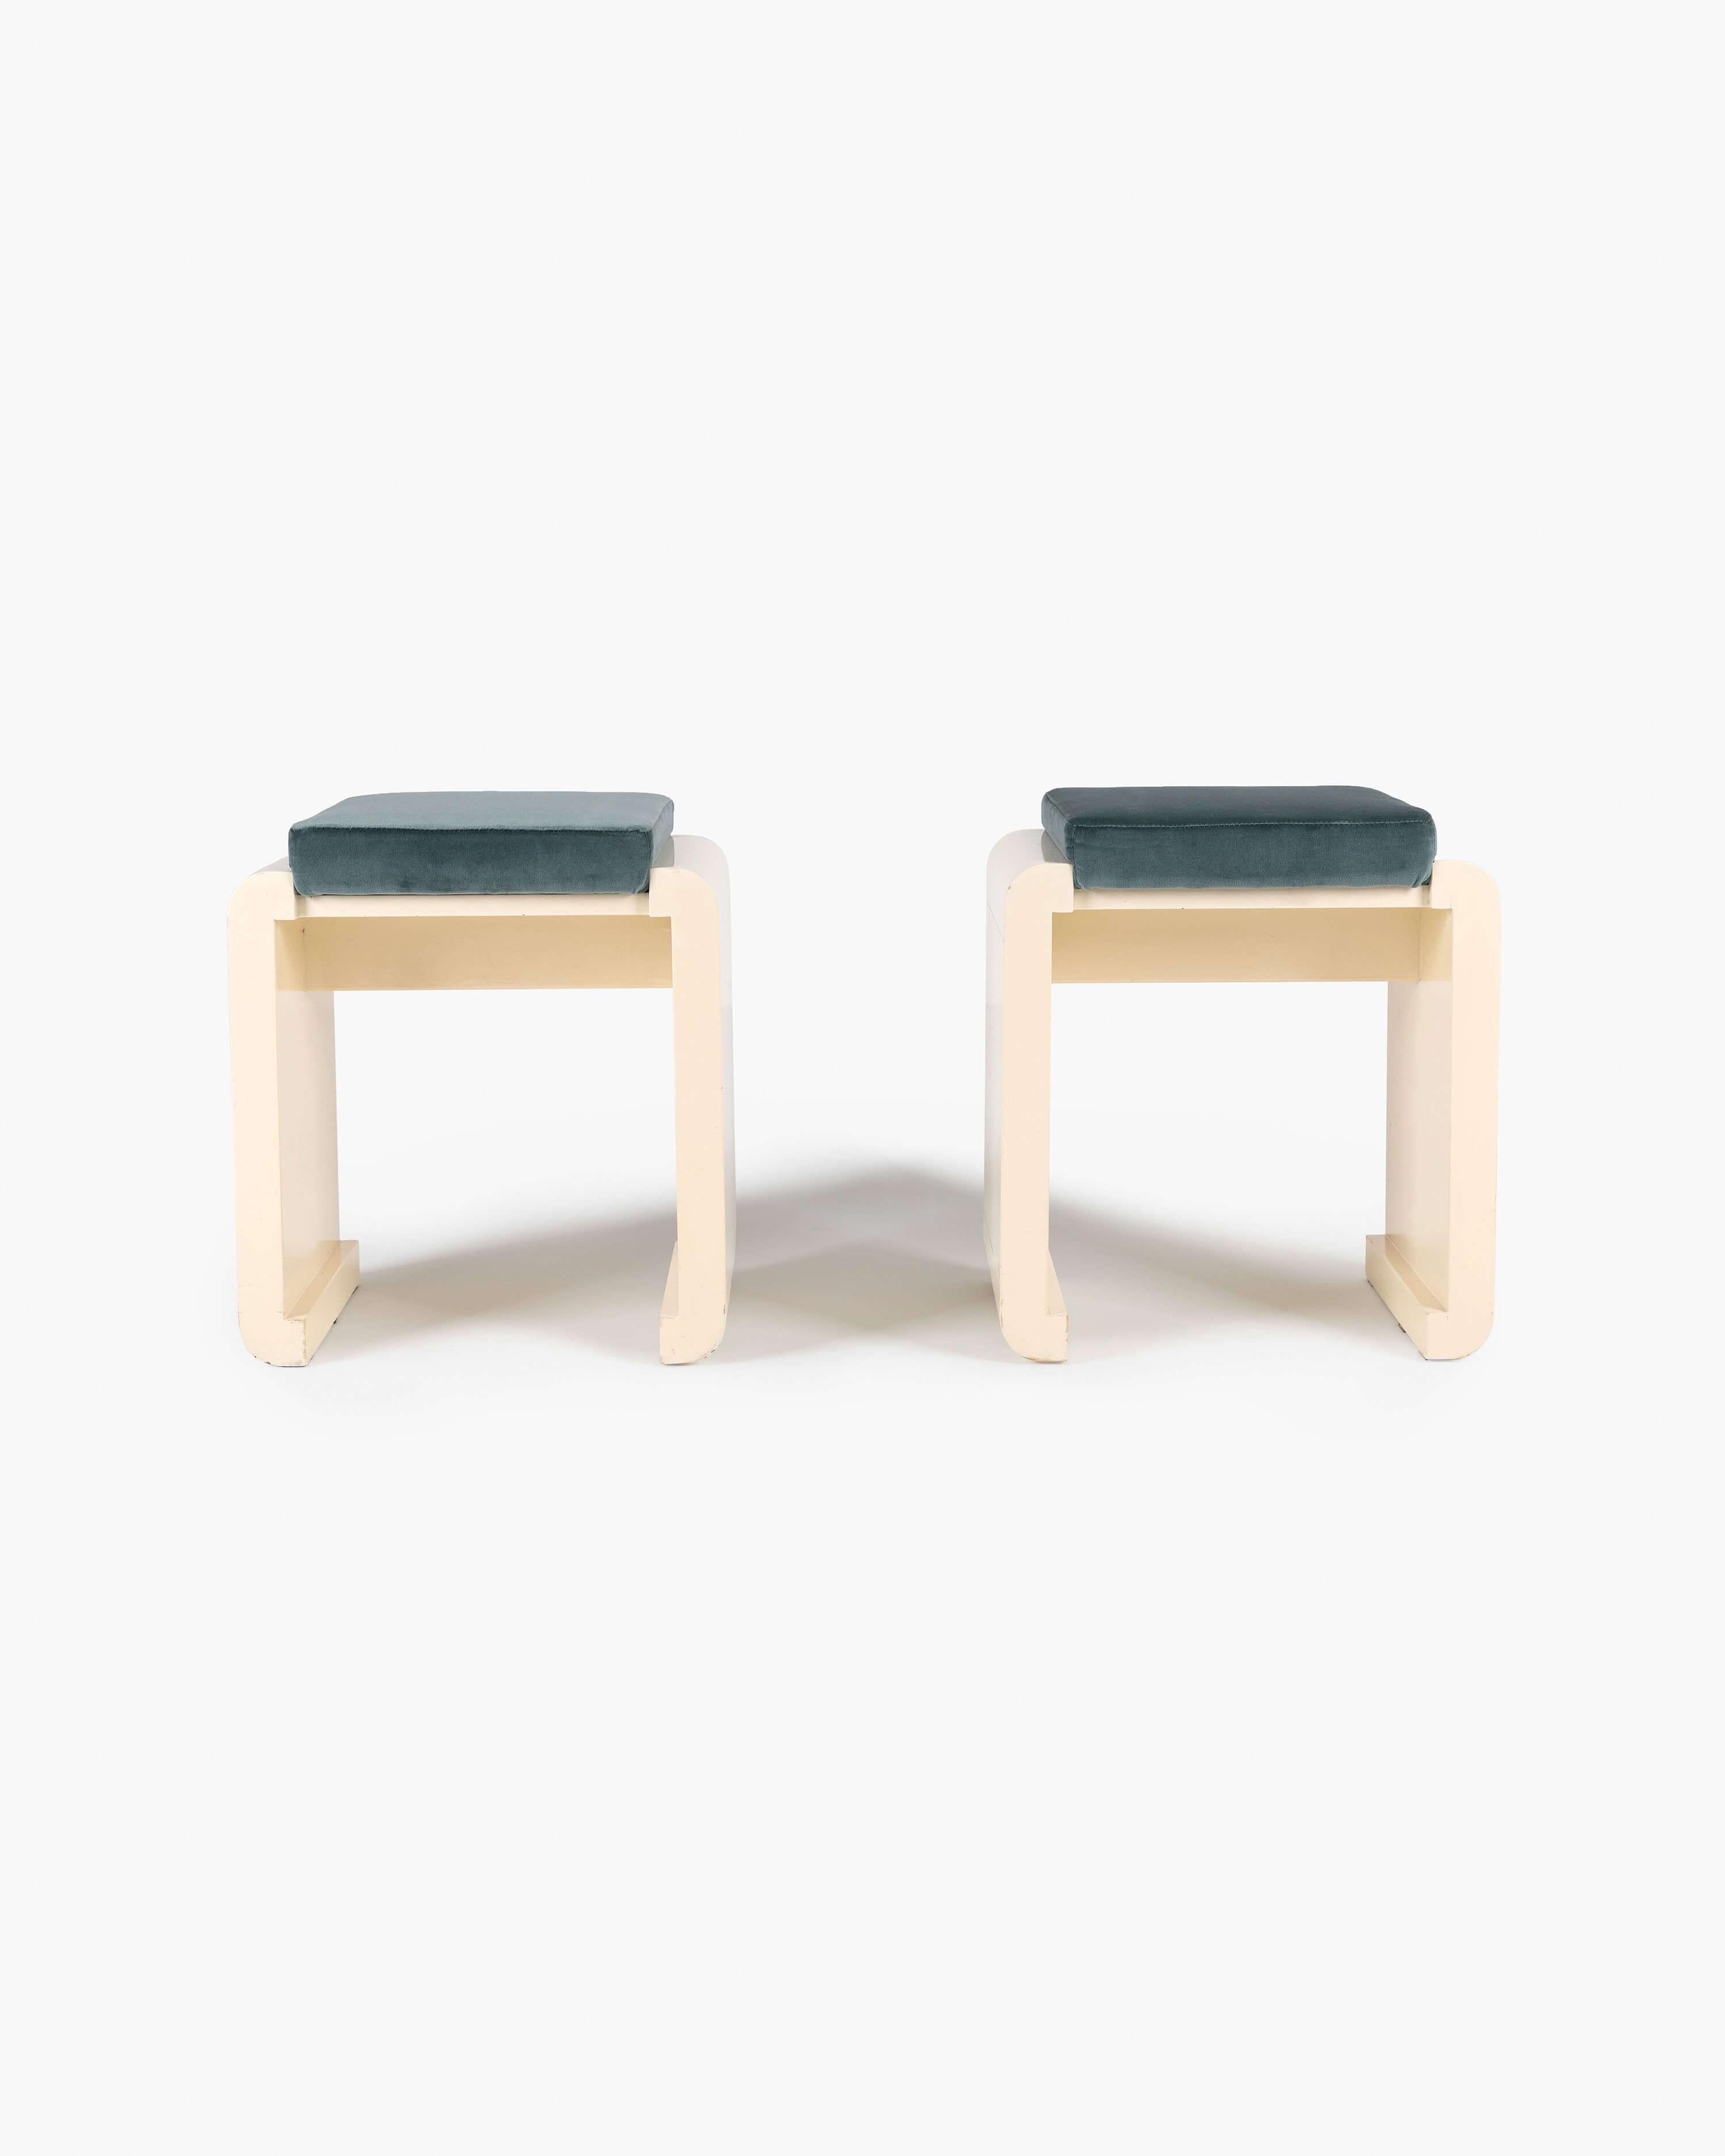 Pair of vanity stools ​​from 1970s Italy, uniting modernist lines with luxurious velvet upholstery. The gracefully rounded creme lacquered frame of this design supports a well-structured teal velvet cushion.